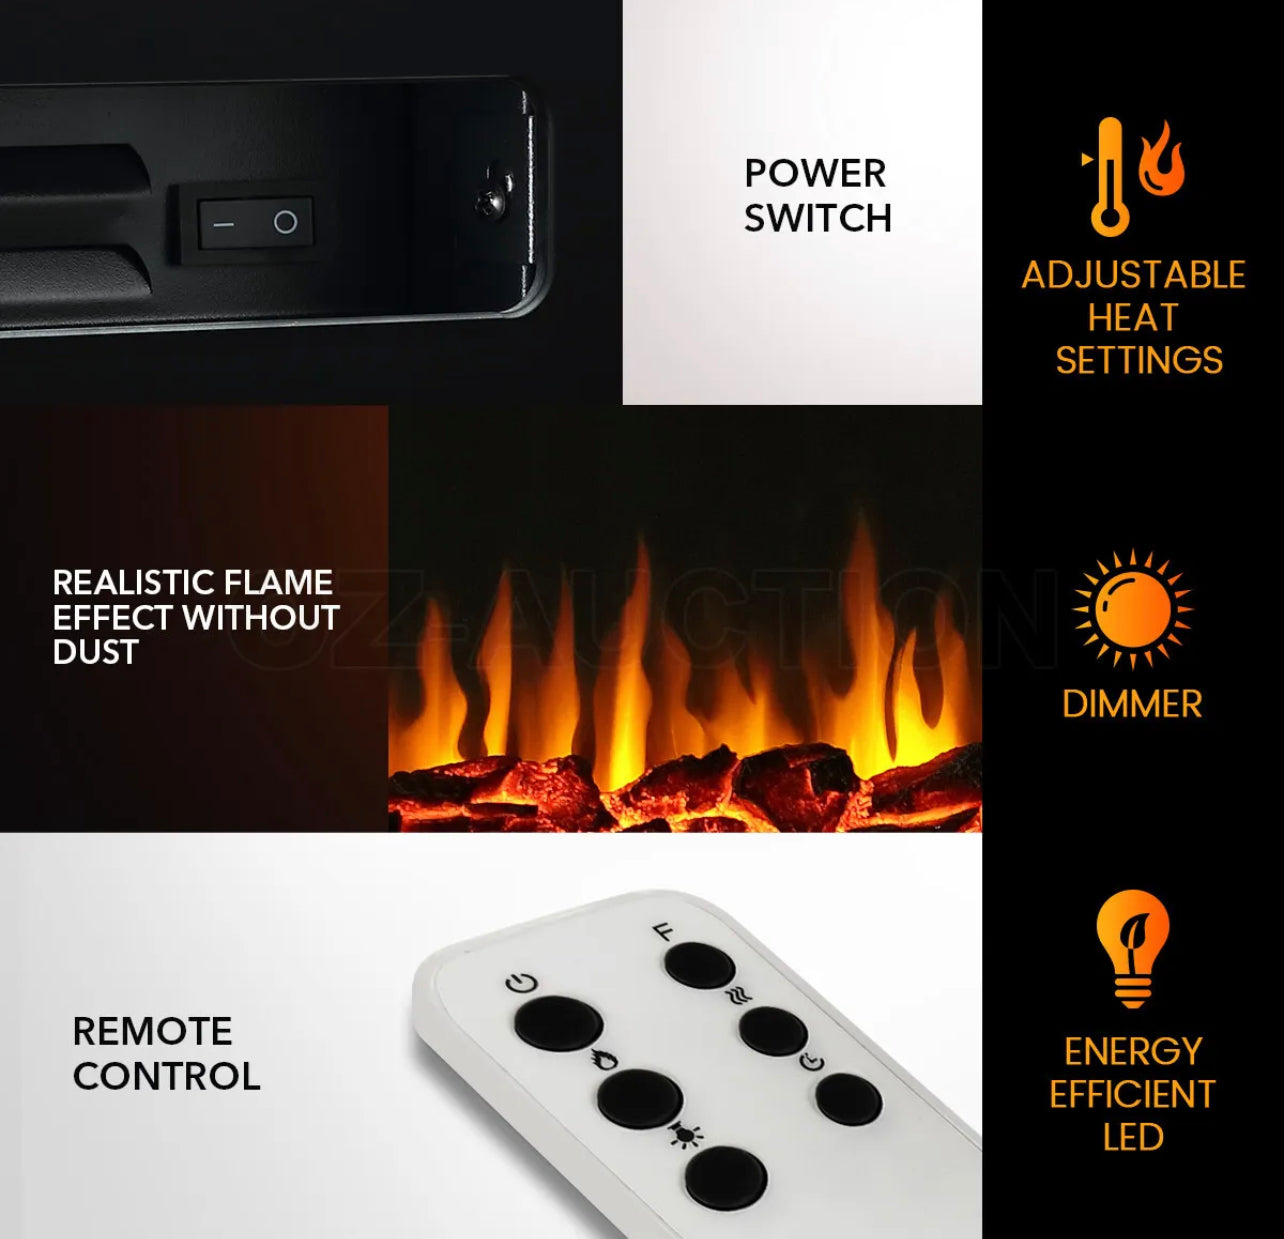 100cm Electric Fireplace Heater Wall Recessed Mounted  900/1800W 5 FlameI